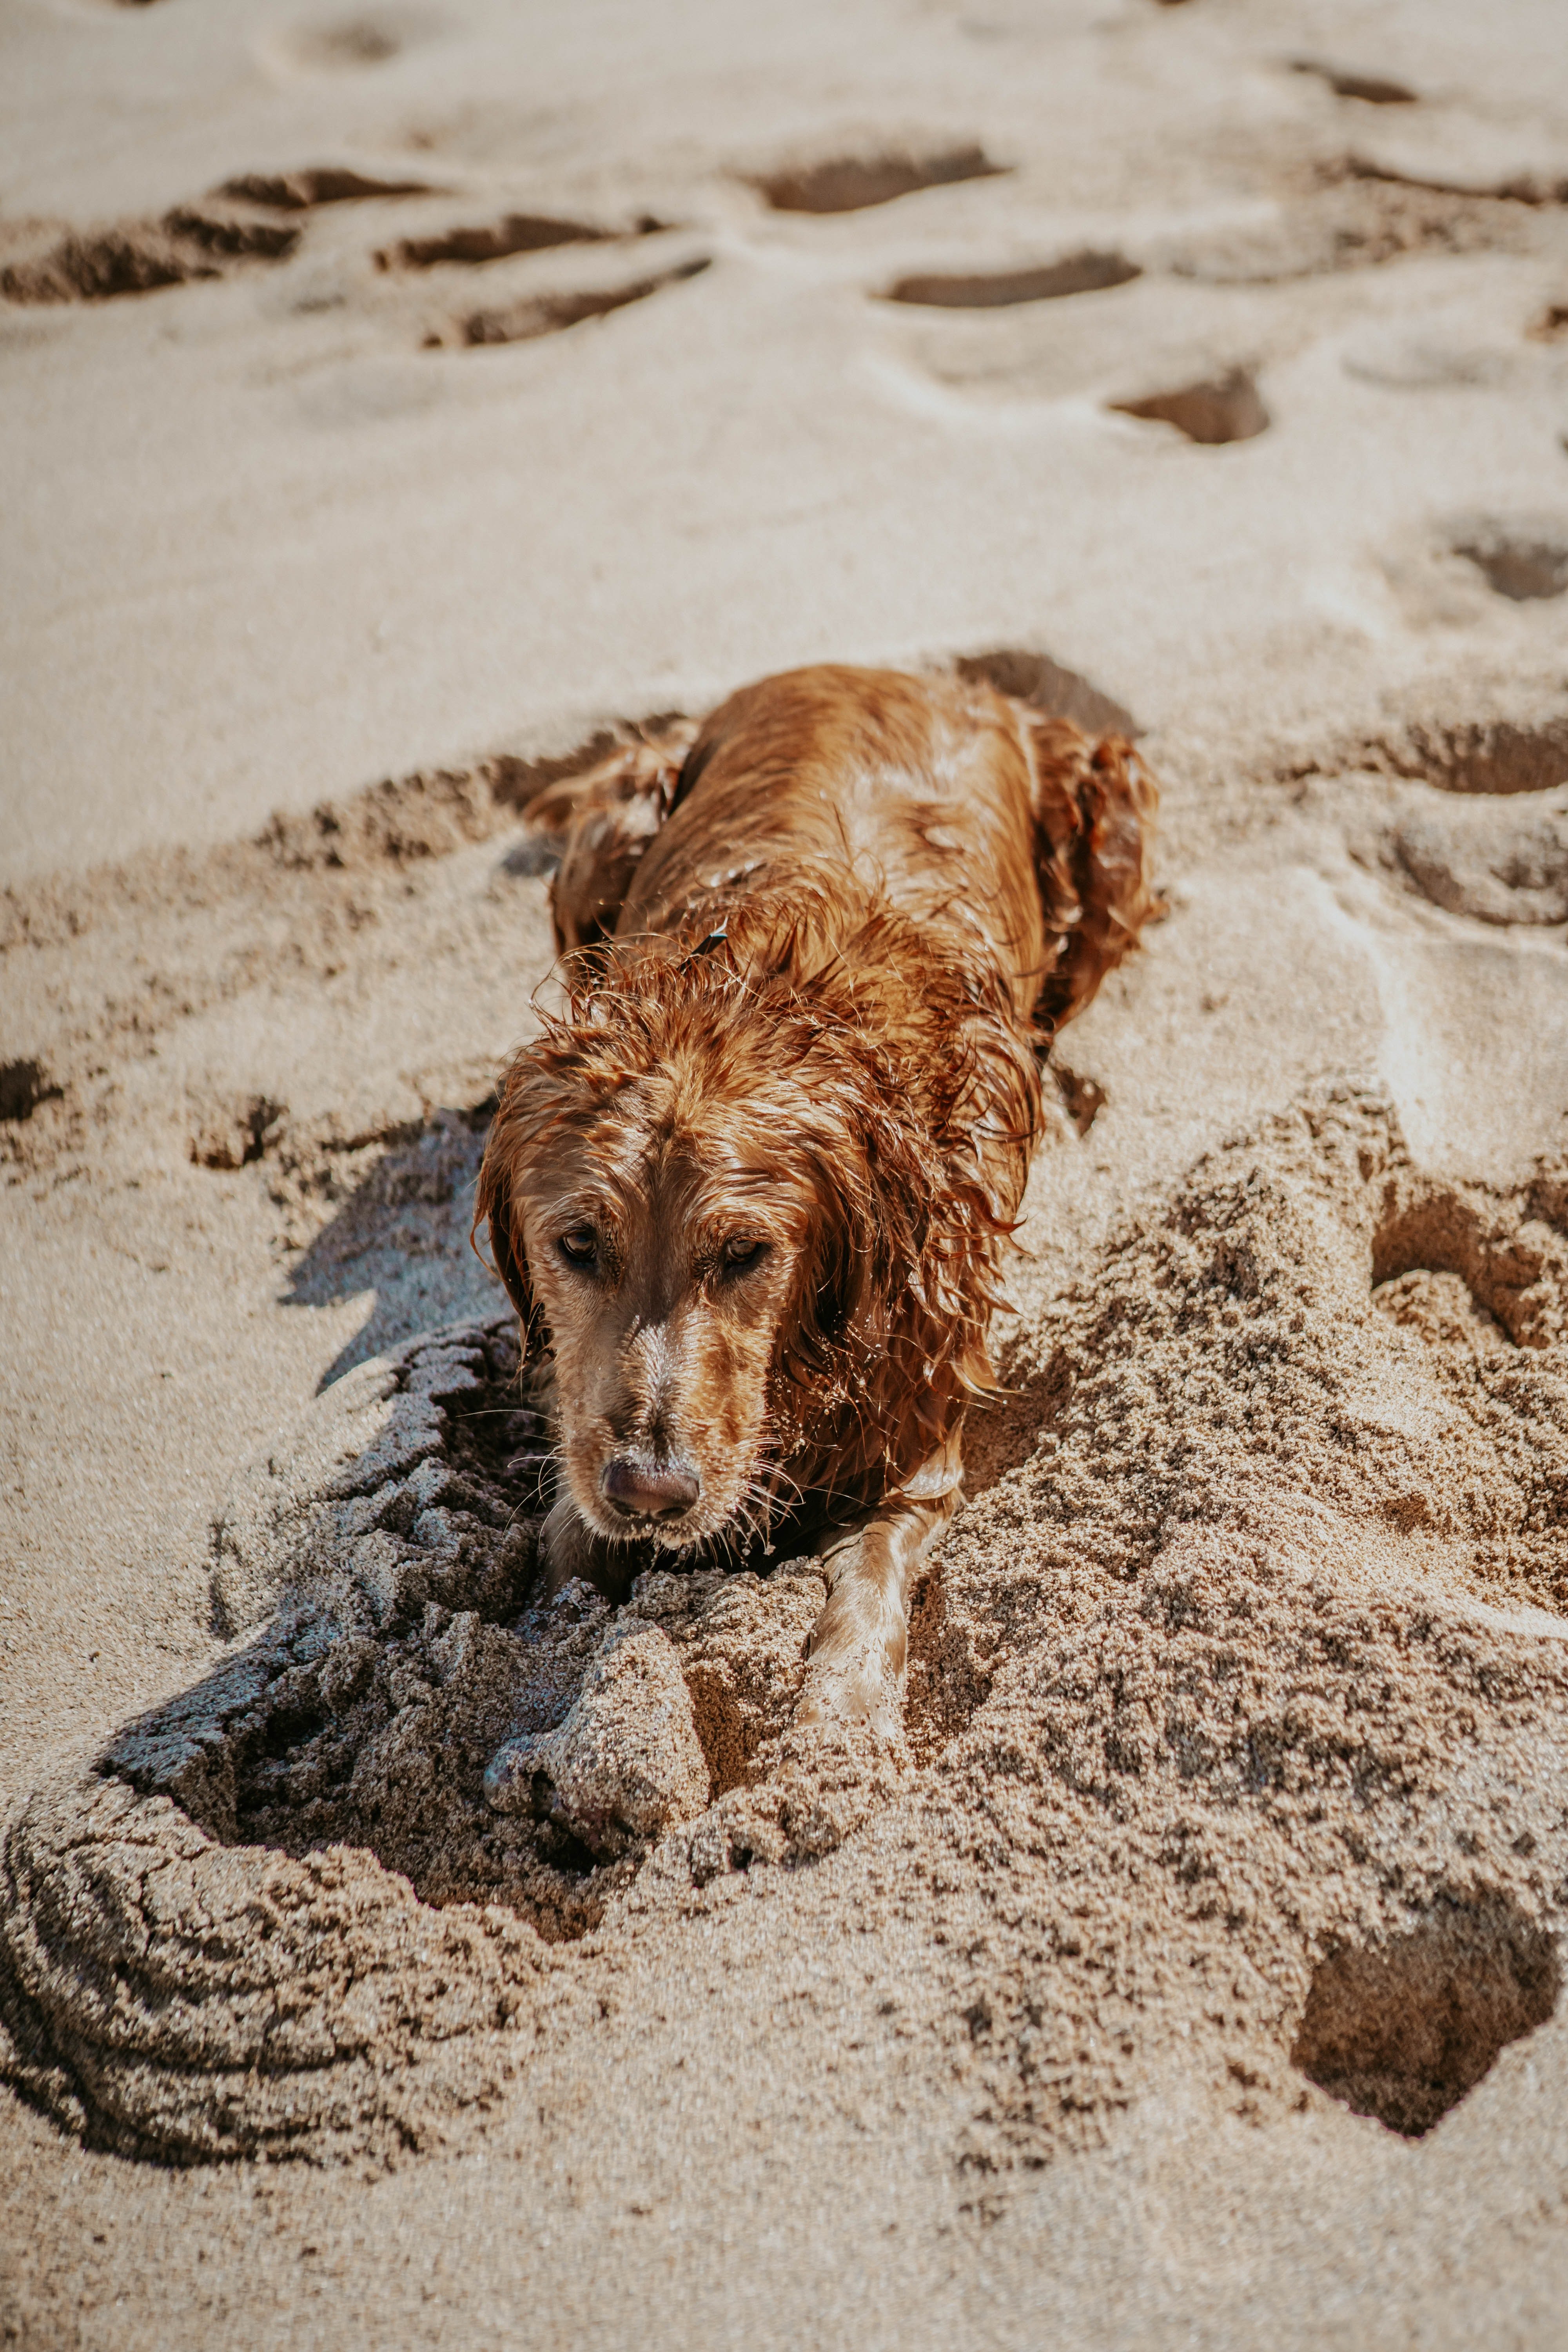 They reached the shore, and Michael wrapped a towel around the tired dog. | Source: Pexels